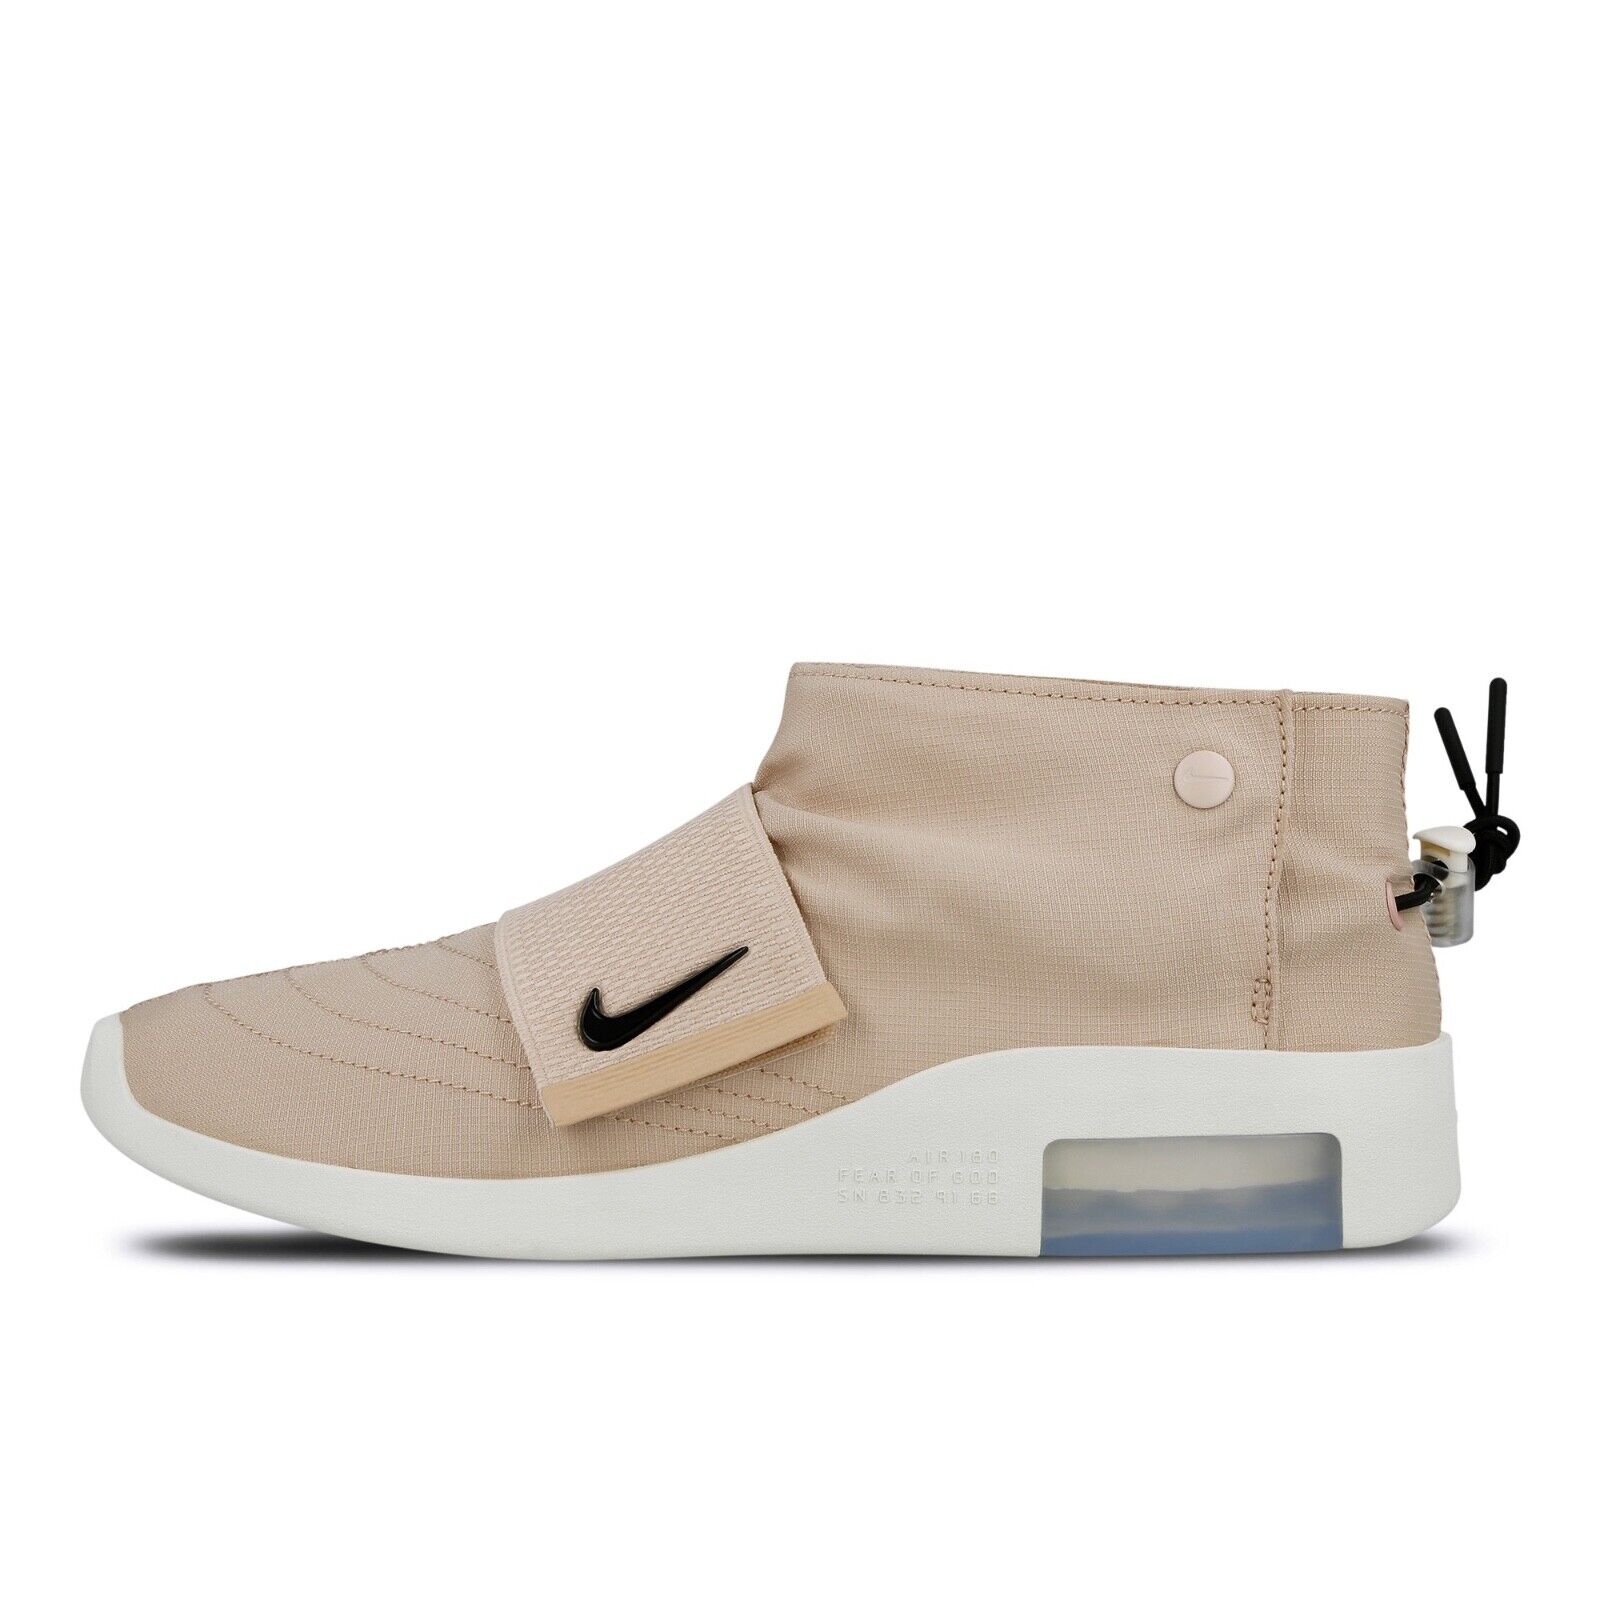 Professor Guggenheim Museum stock Men's Nike Air X Fear Of God MOC "Particle Beige" Fashion Sneakers AT8086  200 | eBay